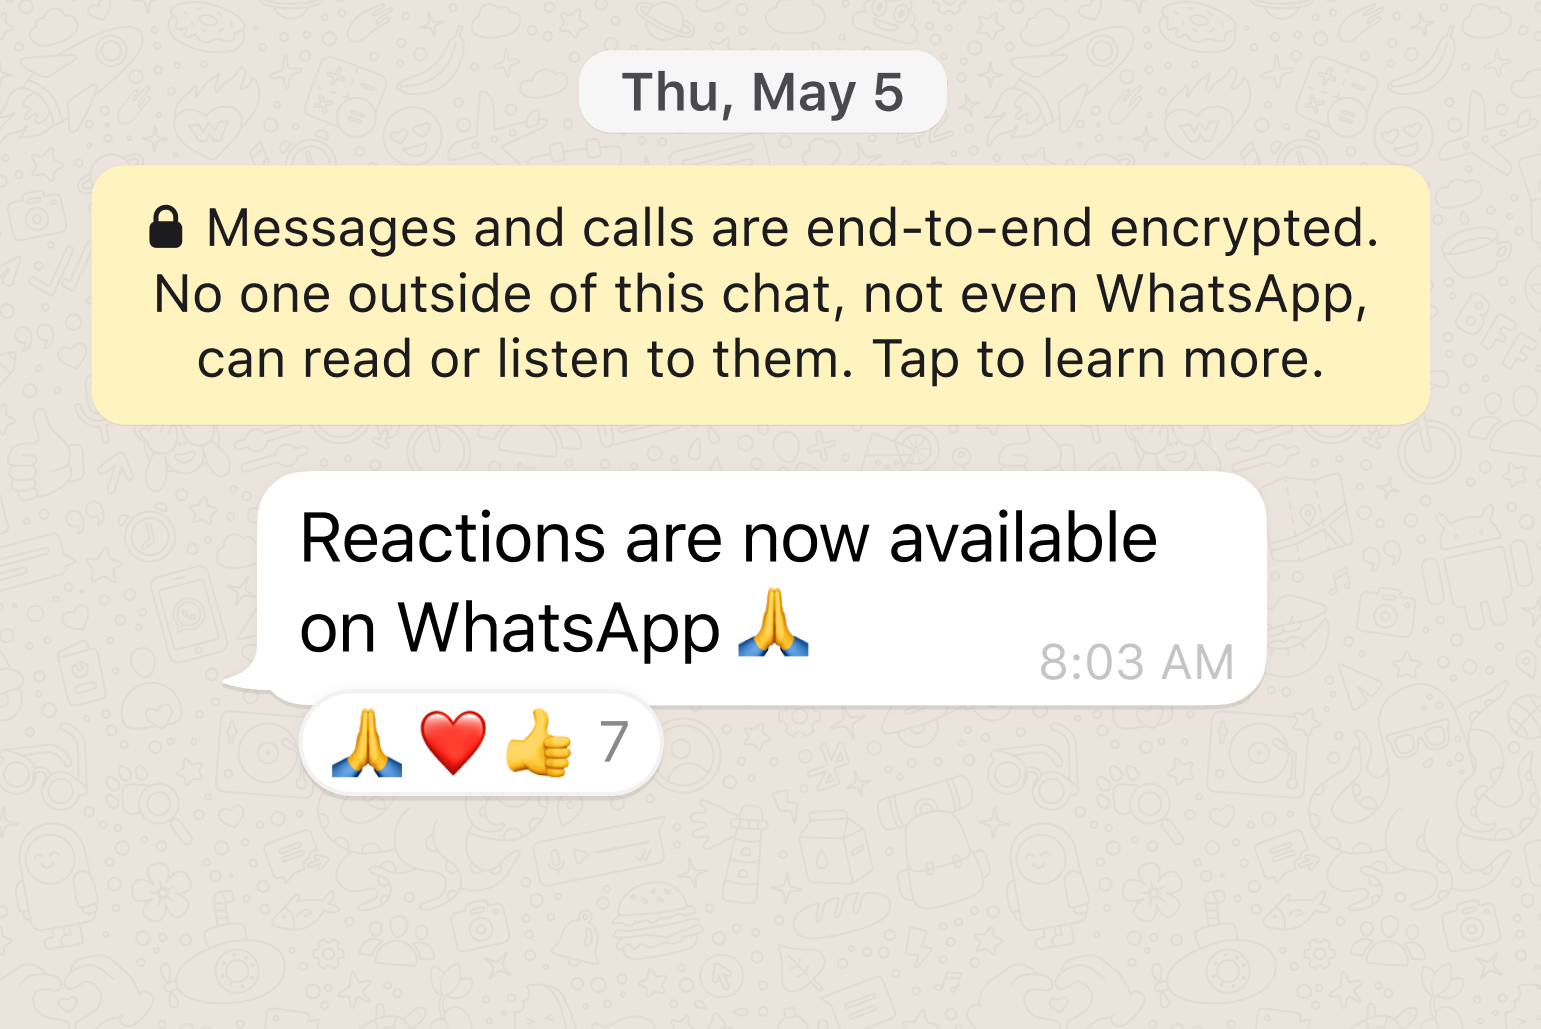 Whatsapp announces new features such as ’emoji reactions,’ larger files, and group conversations